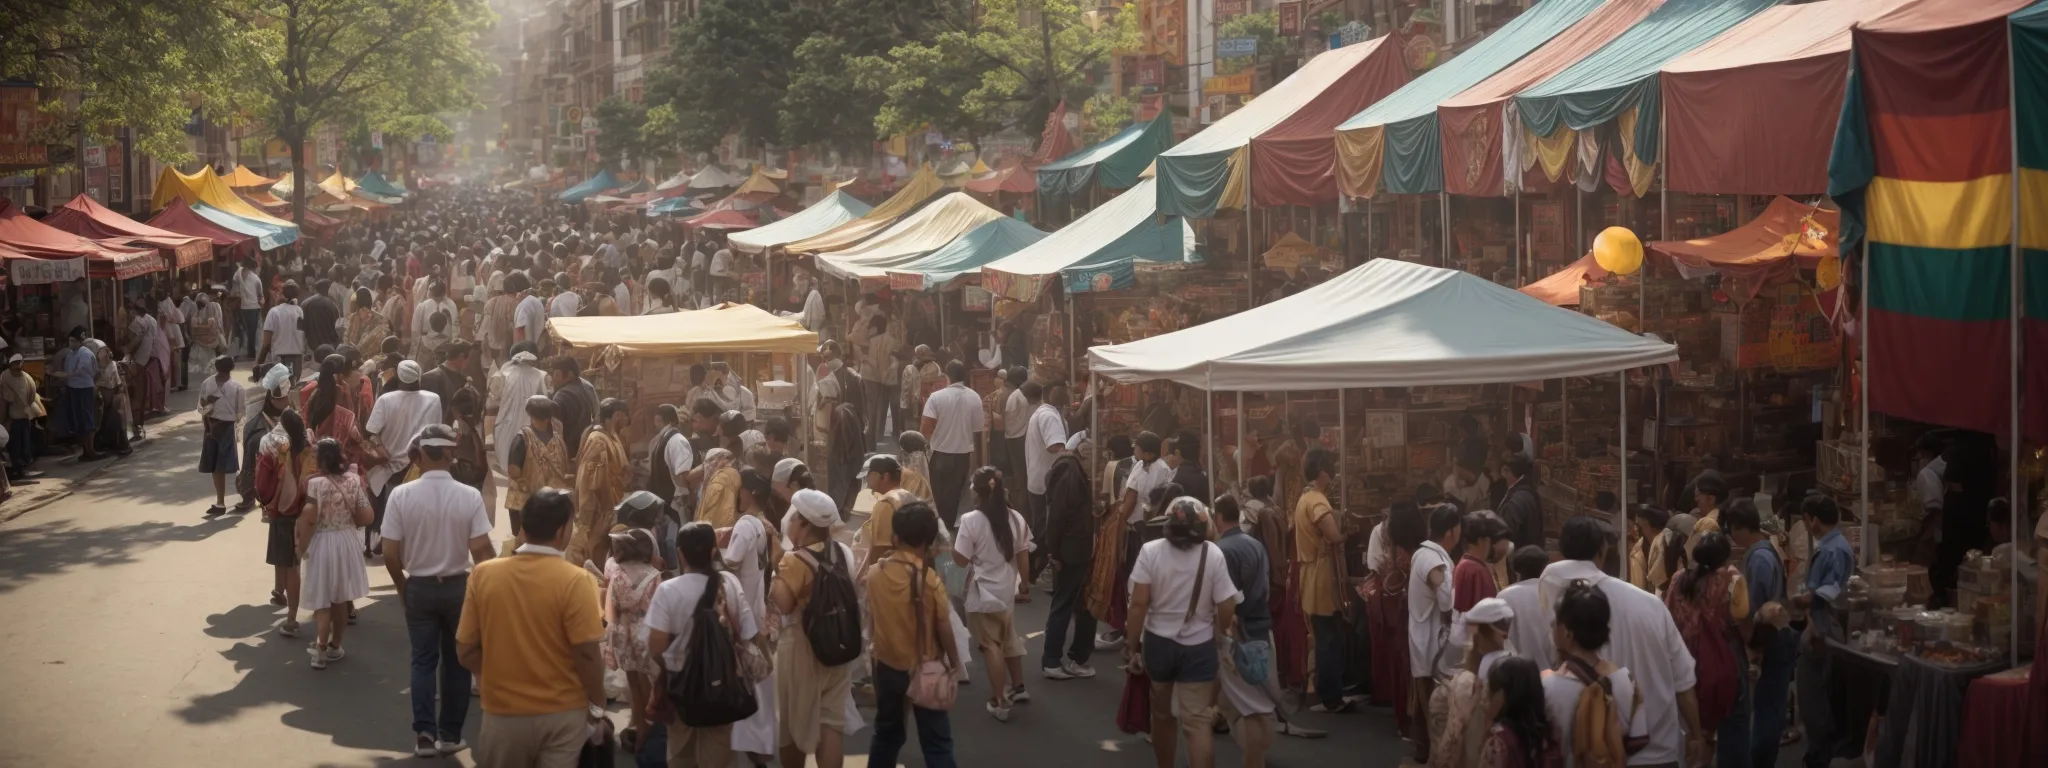 a vibrant street fair with local business booths engaging with community members.